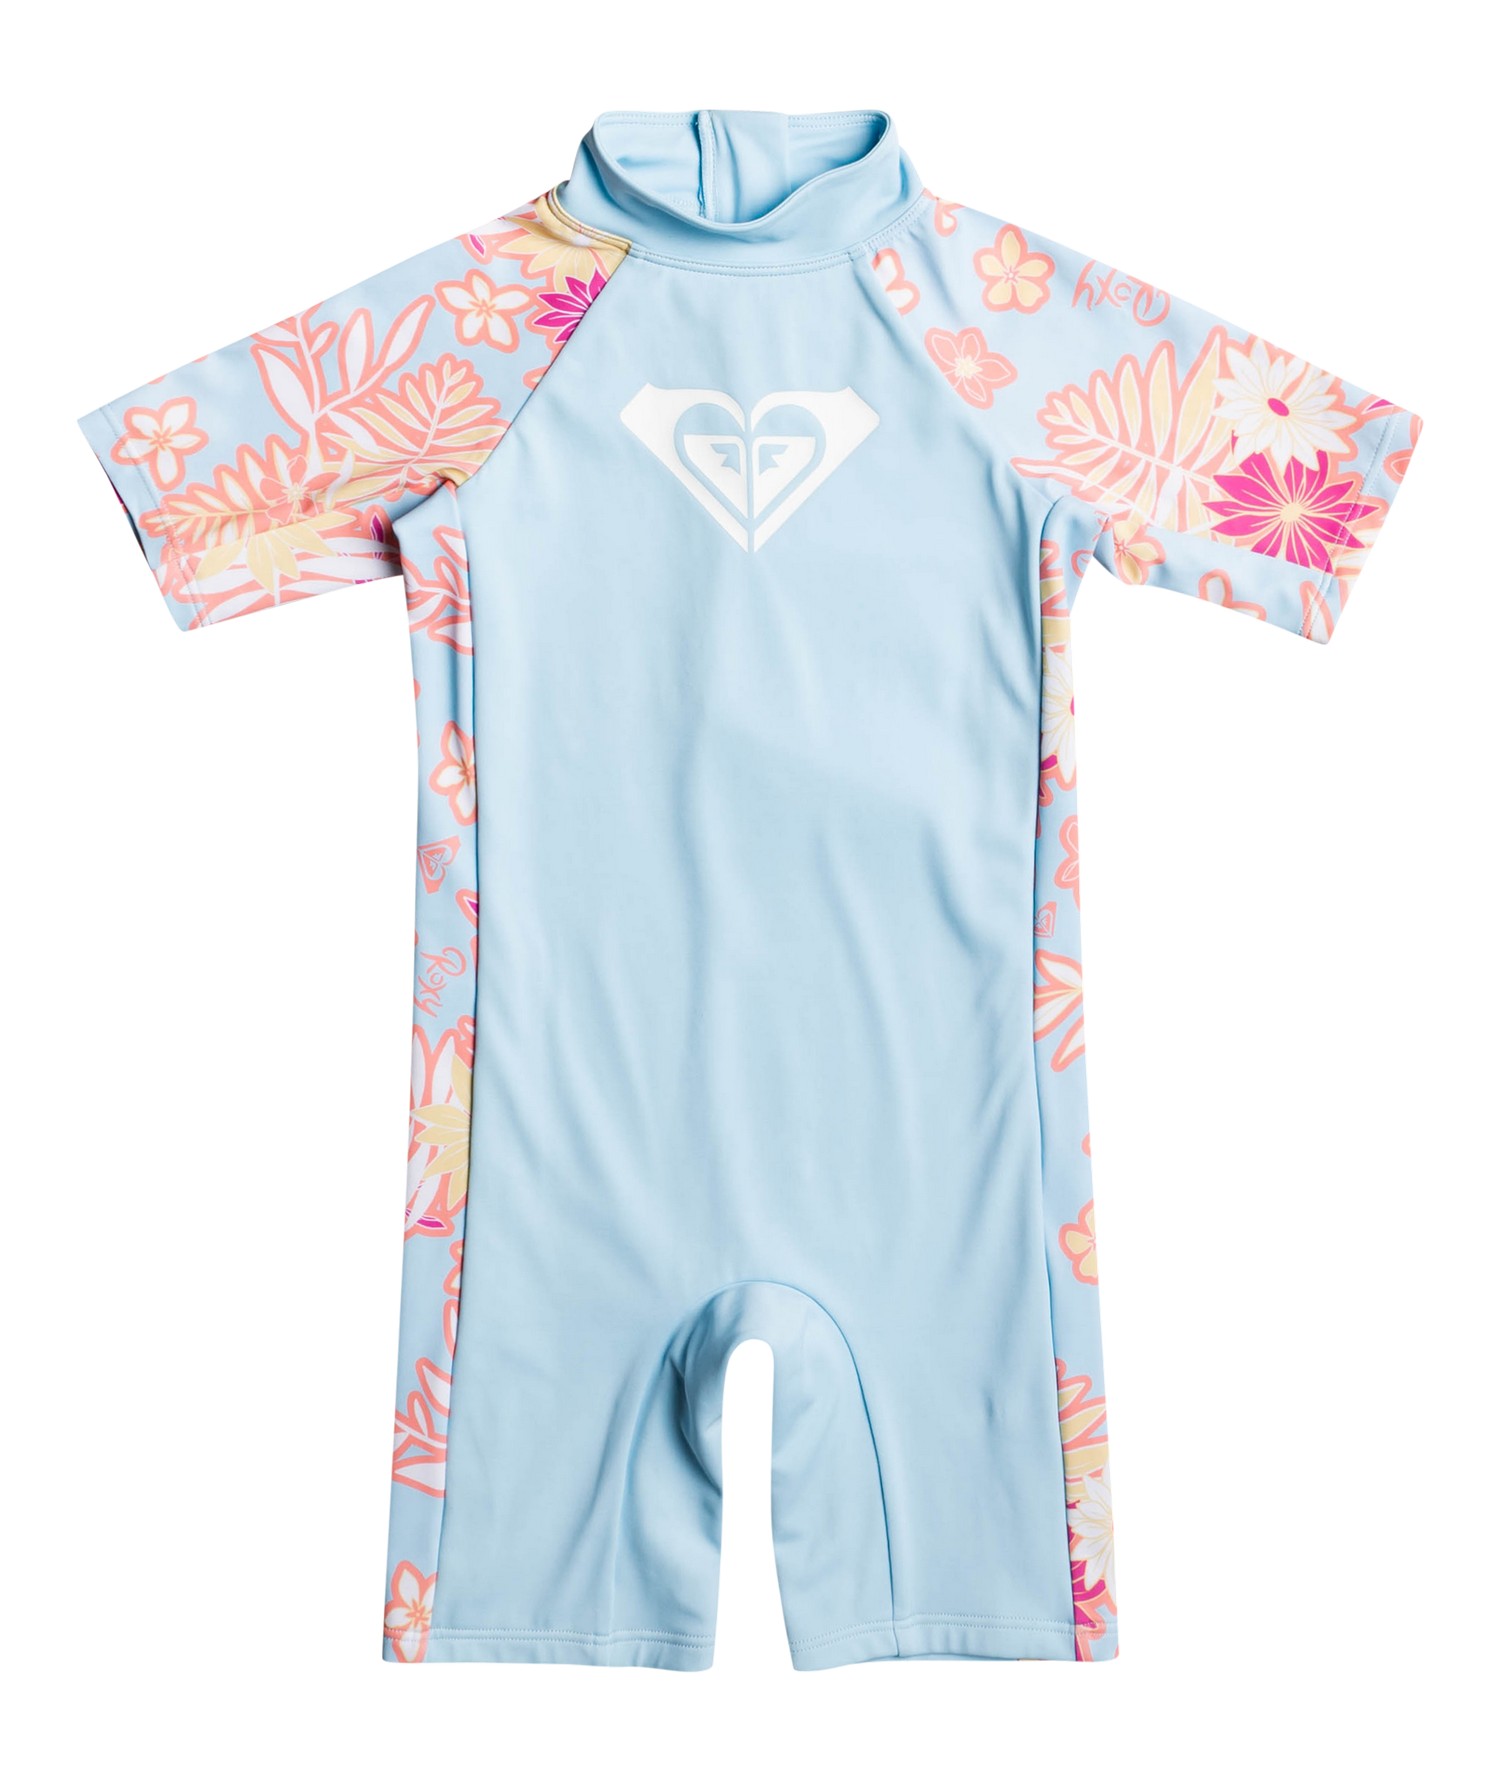 Roxy - UV Swimsuit for girls - Funny Childhood Spring Suit - Short sleeve - All Aloha - Cool Blue